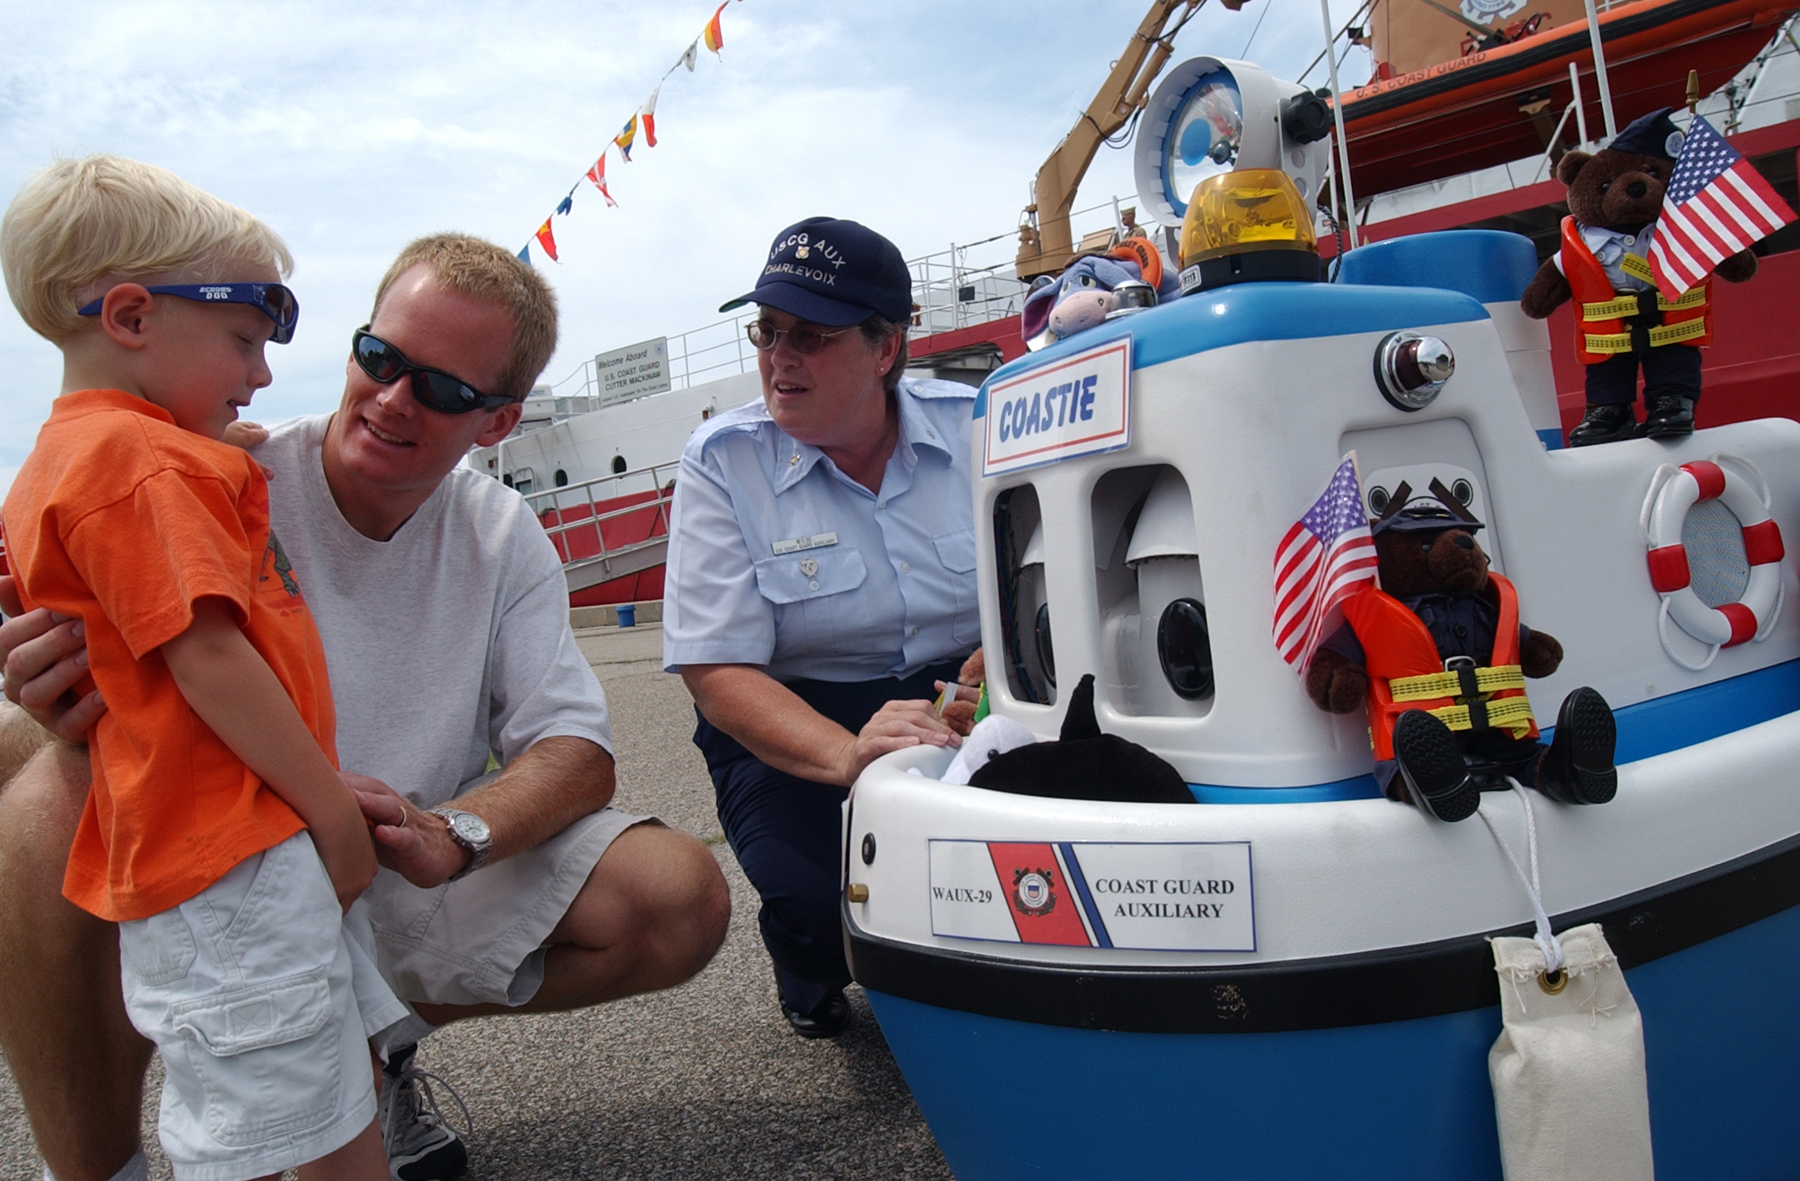 Father and son talk with a Coast Guard Auxiliarist and "Coastie" the safety boat